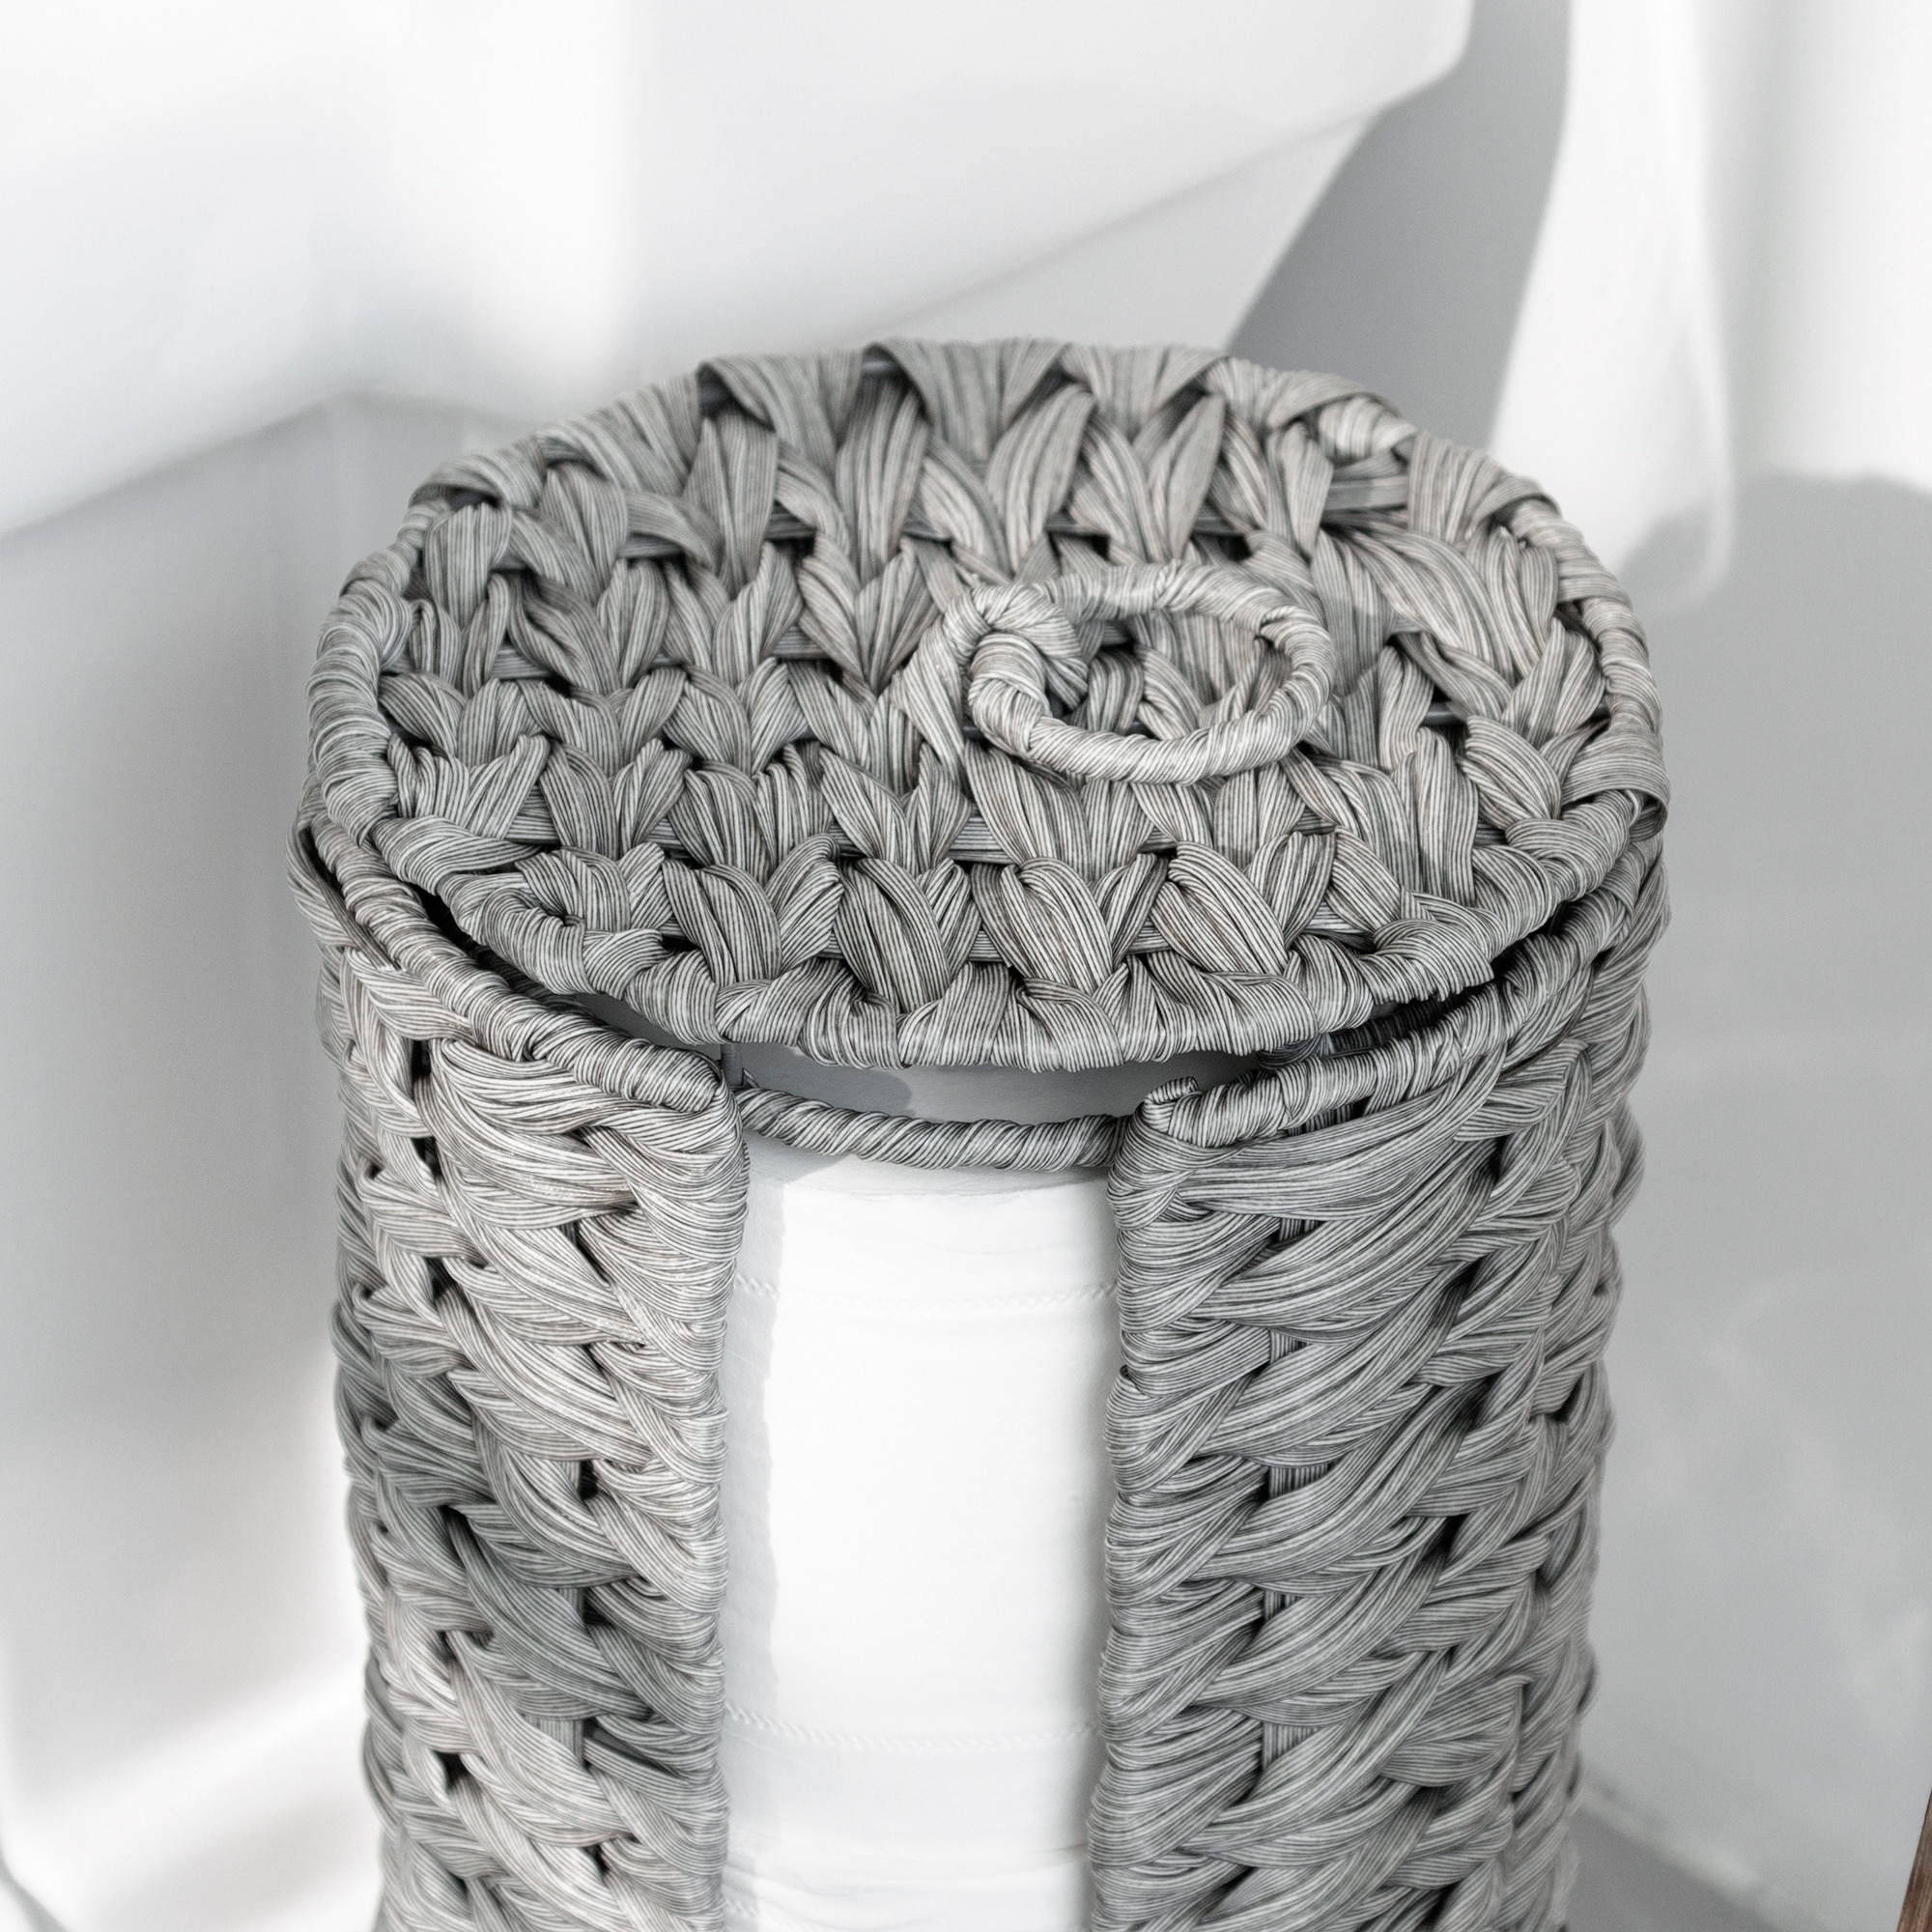 Buy Grey Woven Toilet Roll Holder from Next USA